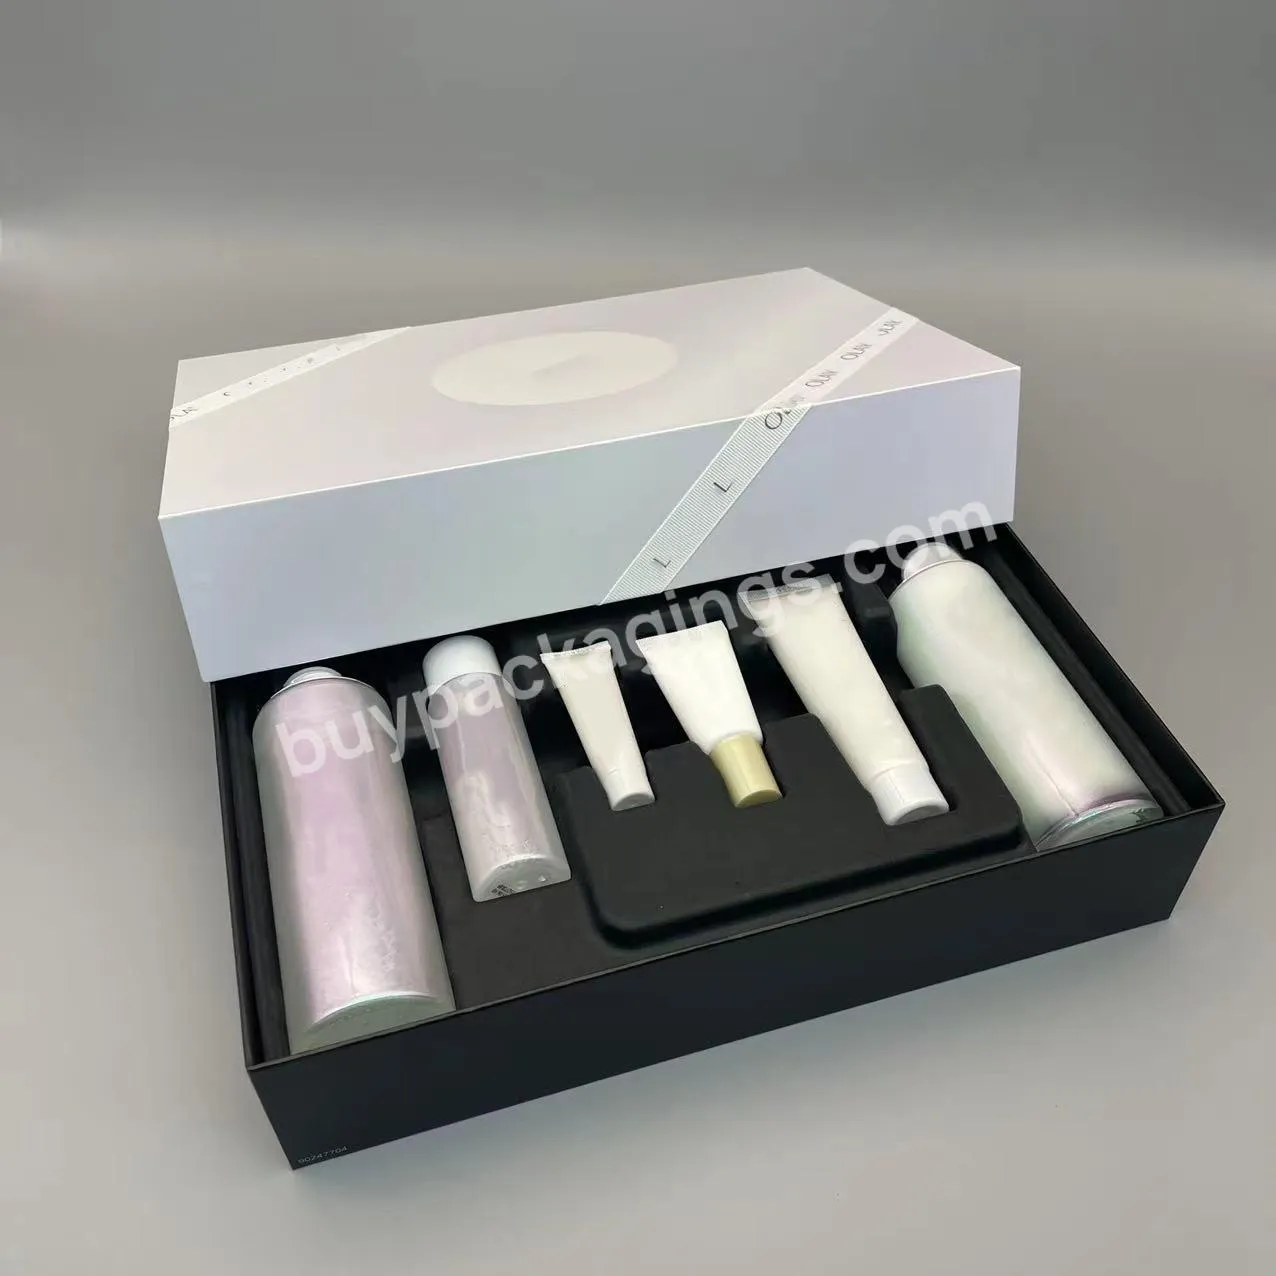 Recycle White Black Skincare Cardboard Cosmetics Gift Box Insert Paper Molded Pulp Packaging Tray - Buy Recycle Paper Molded Pulp Packaging,Cosmetic Packaging Box Insert,Cardboard Cosmetic Packaging Box With Insert.